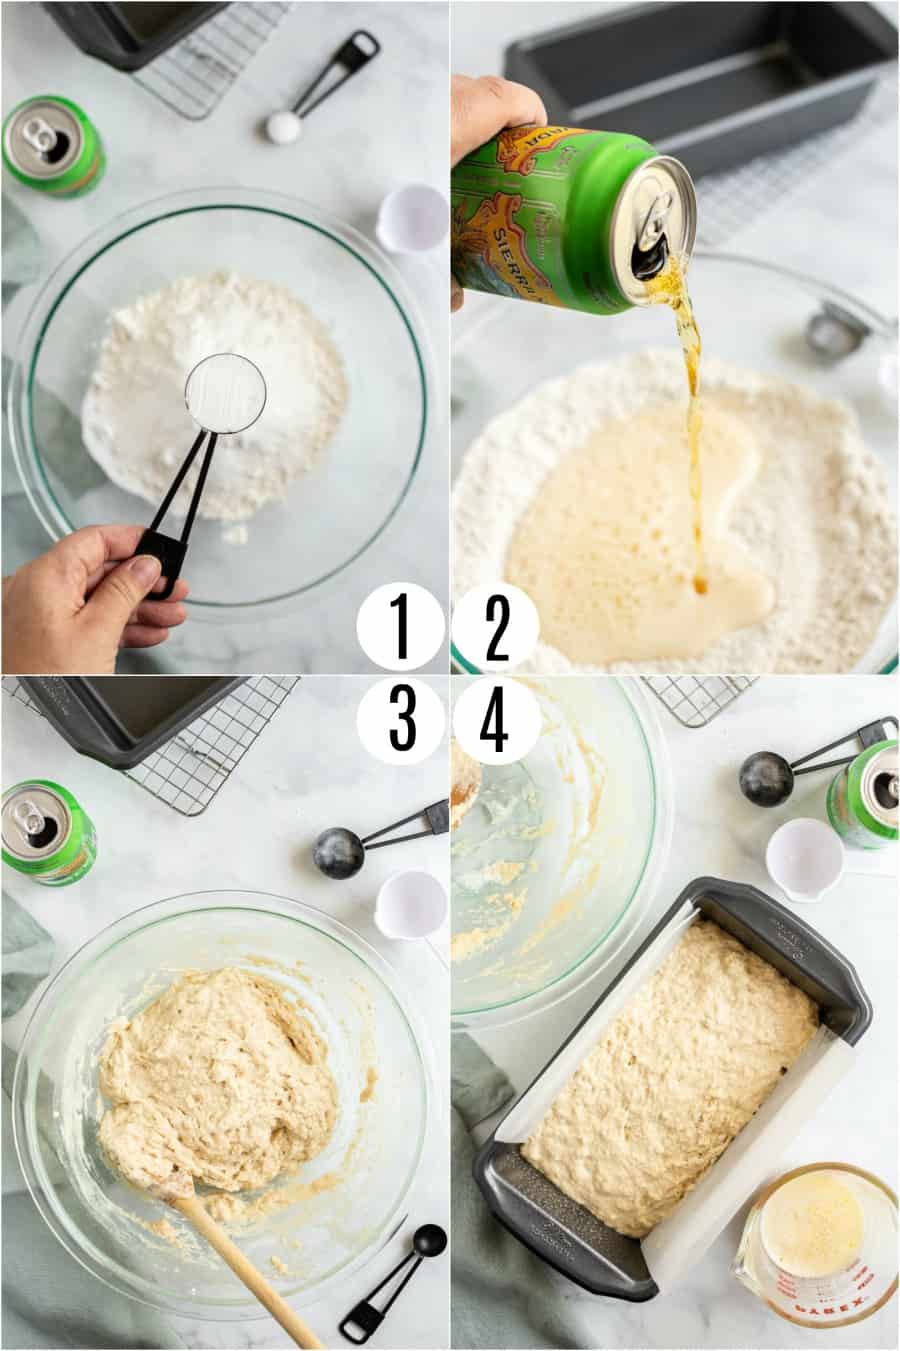 Step by step photos showing how to make beer bread.